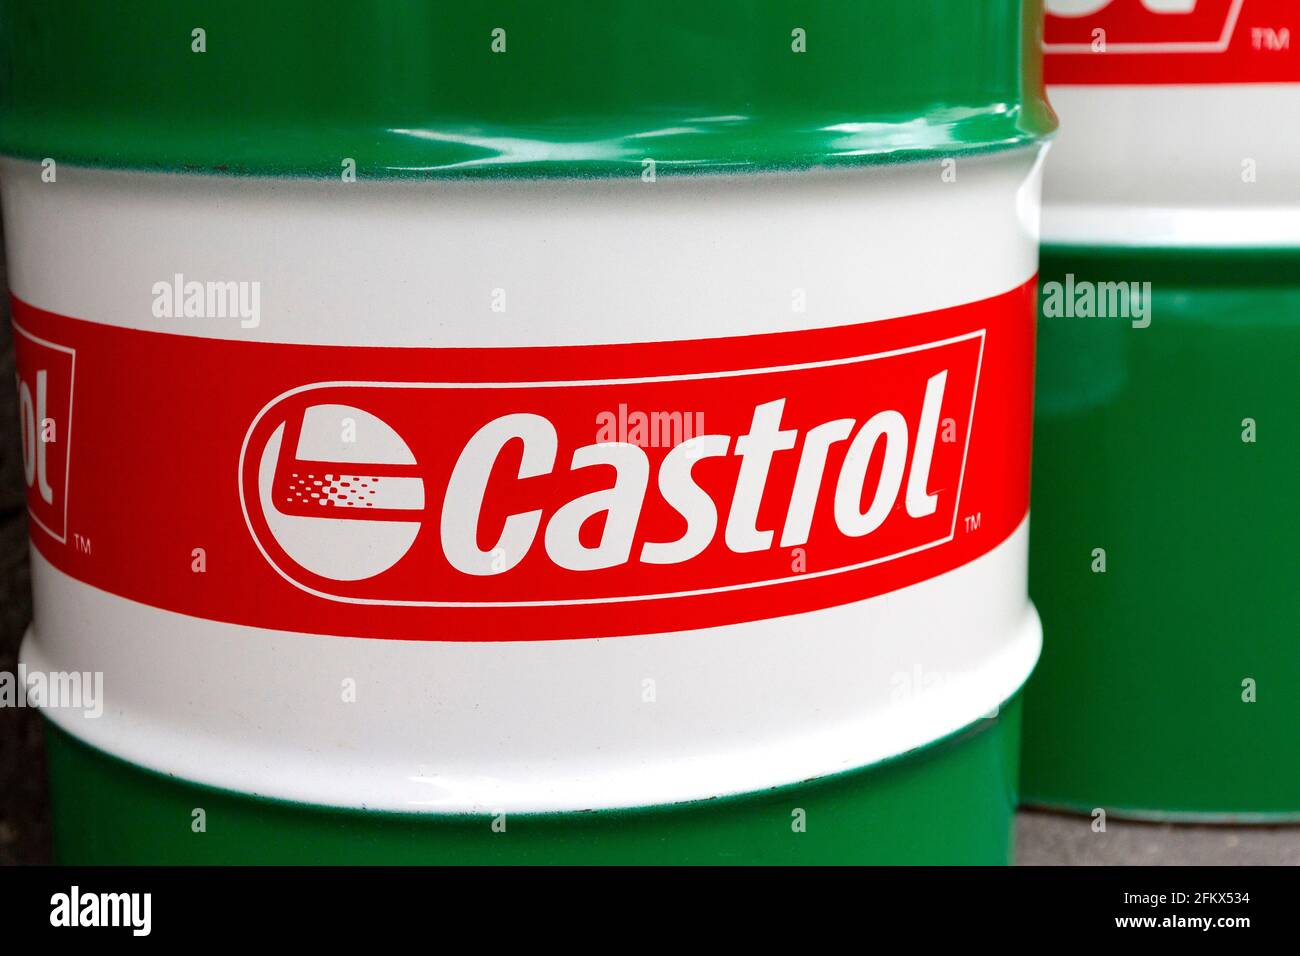 Castrol, British Brand For Lubricants And Oil Products Stock Photo